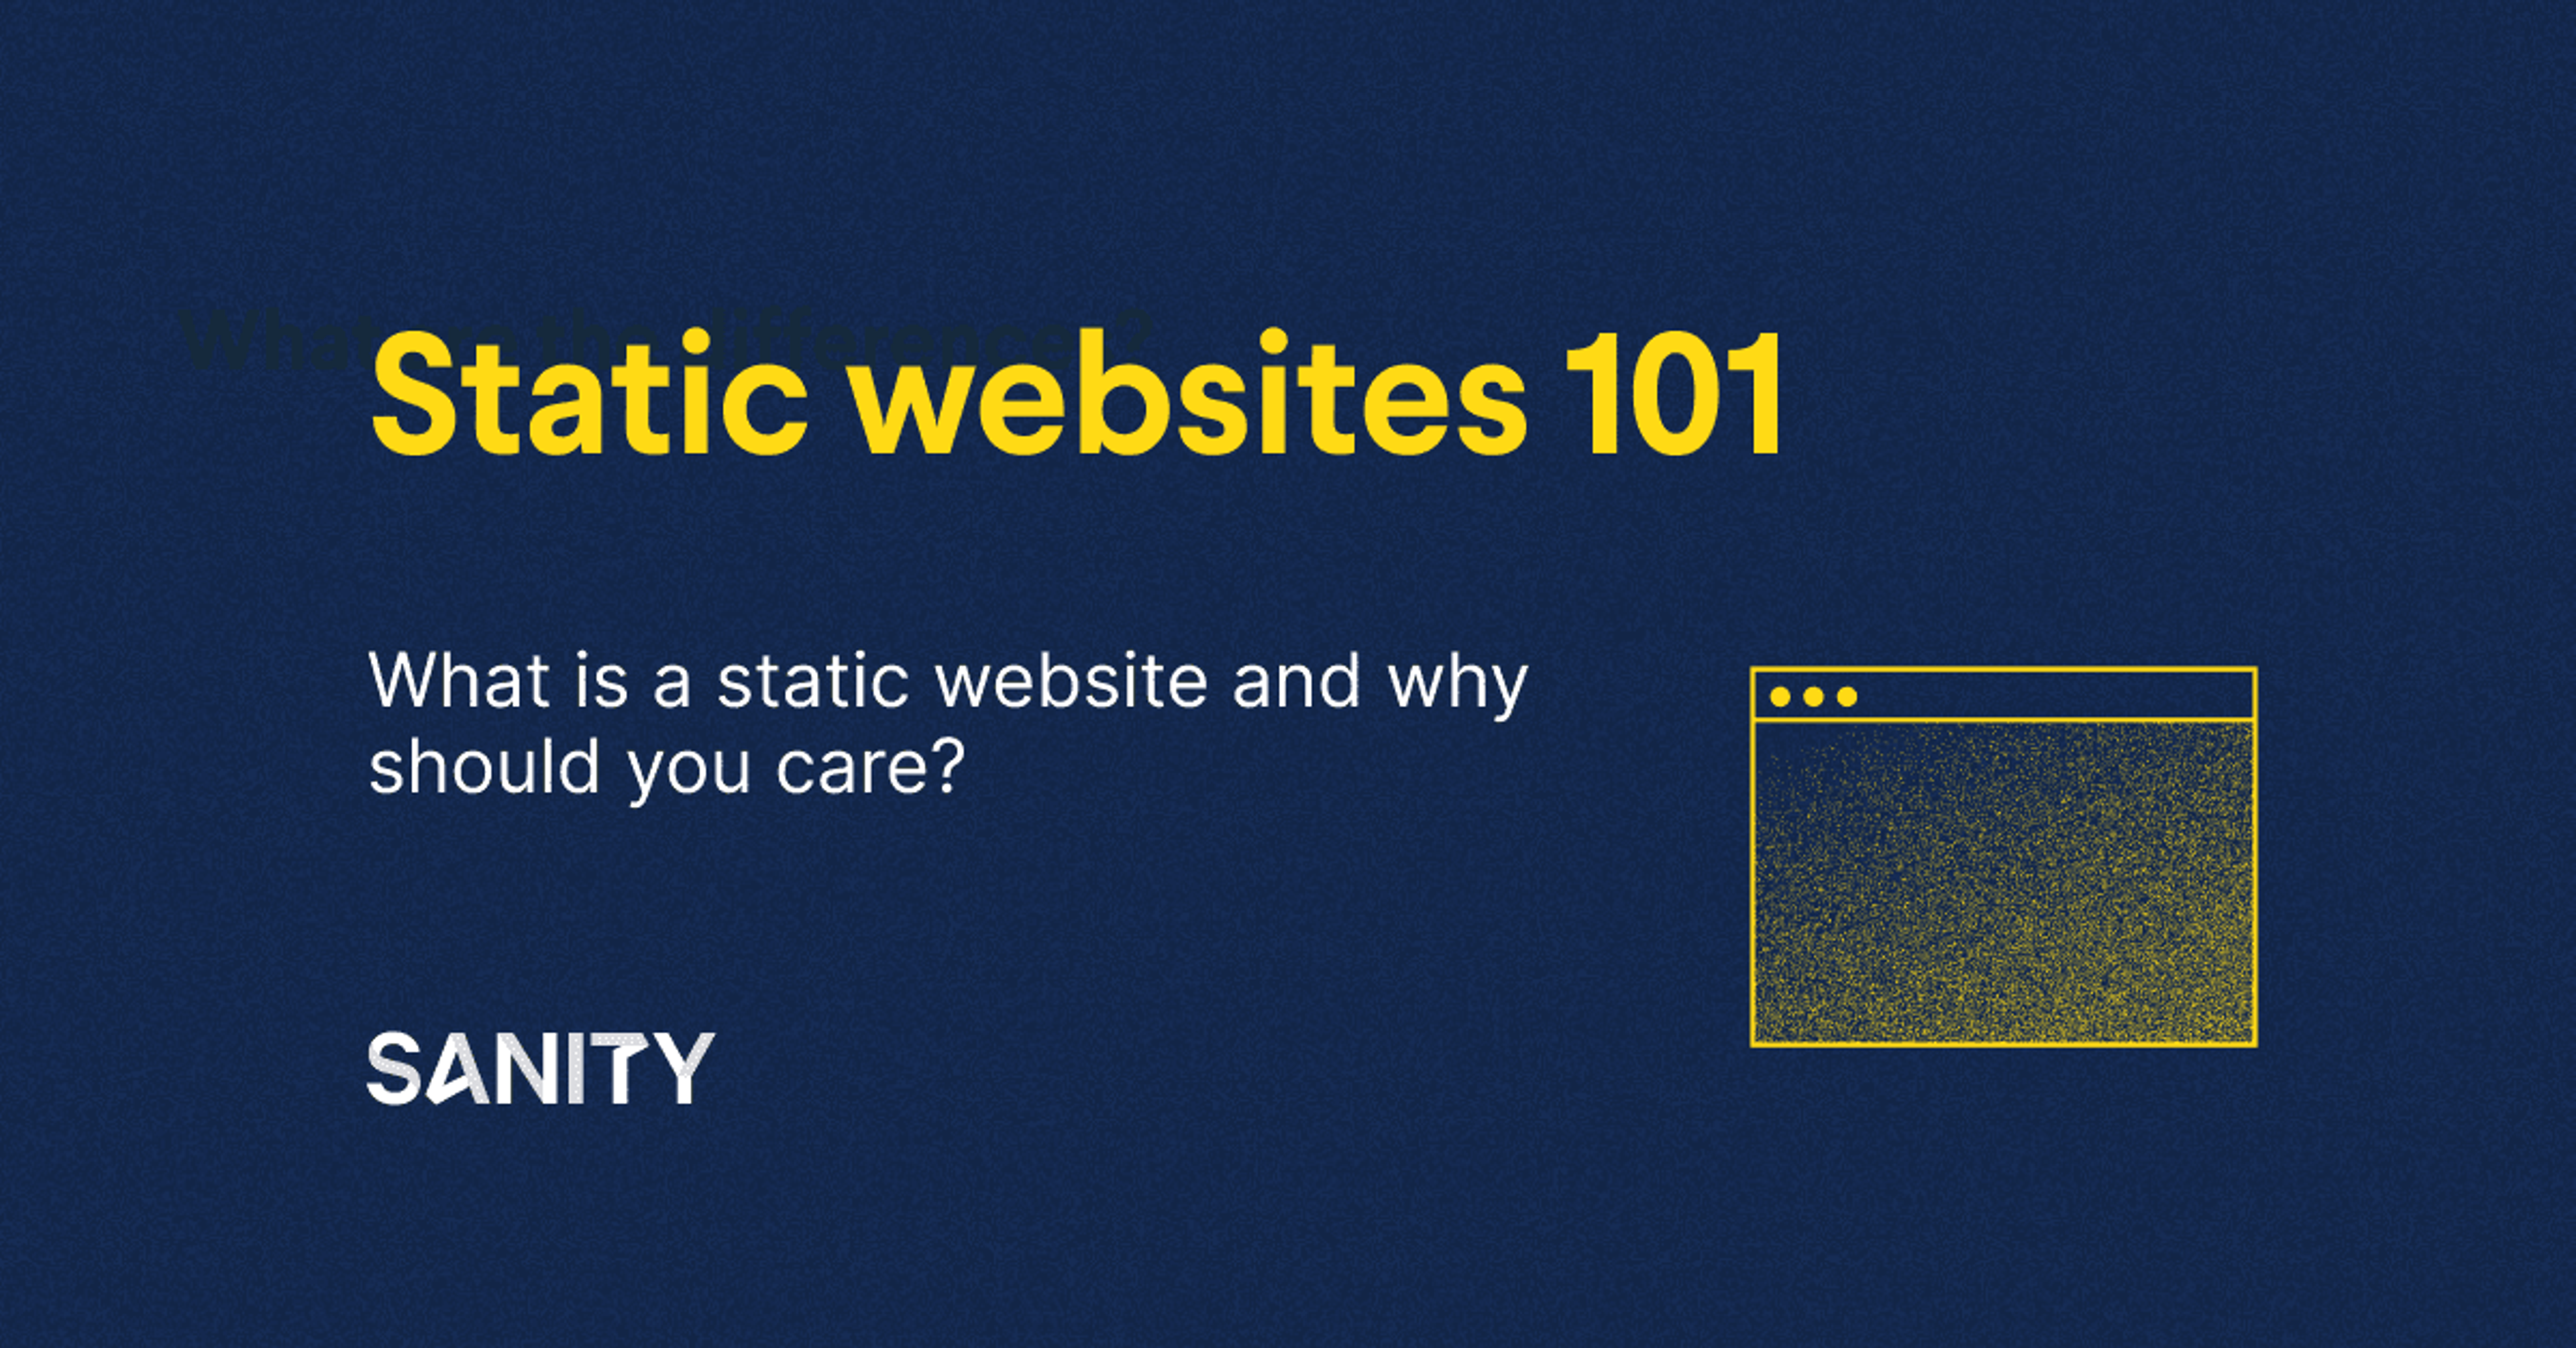 What is a static website?